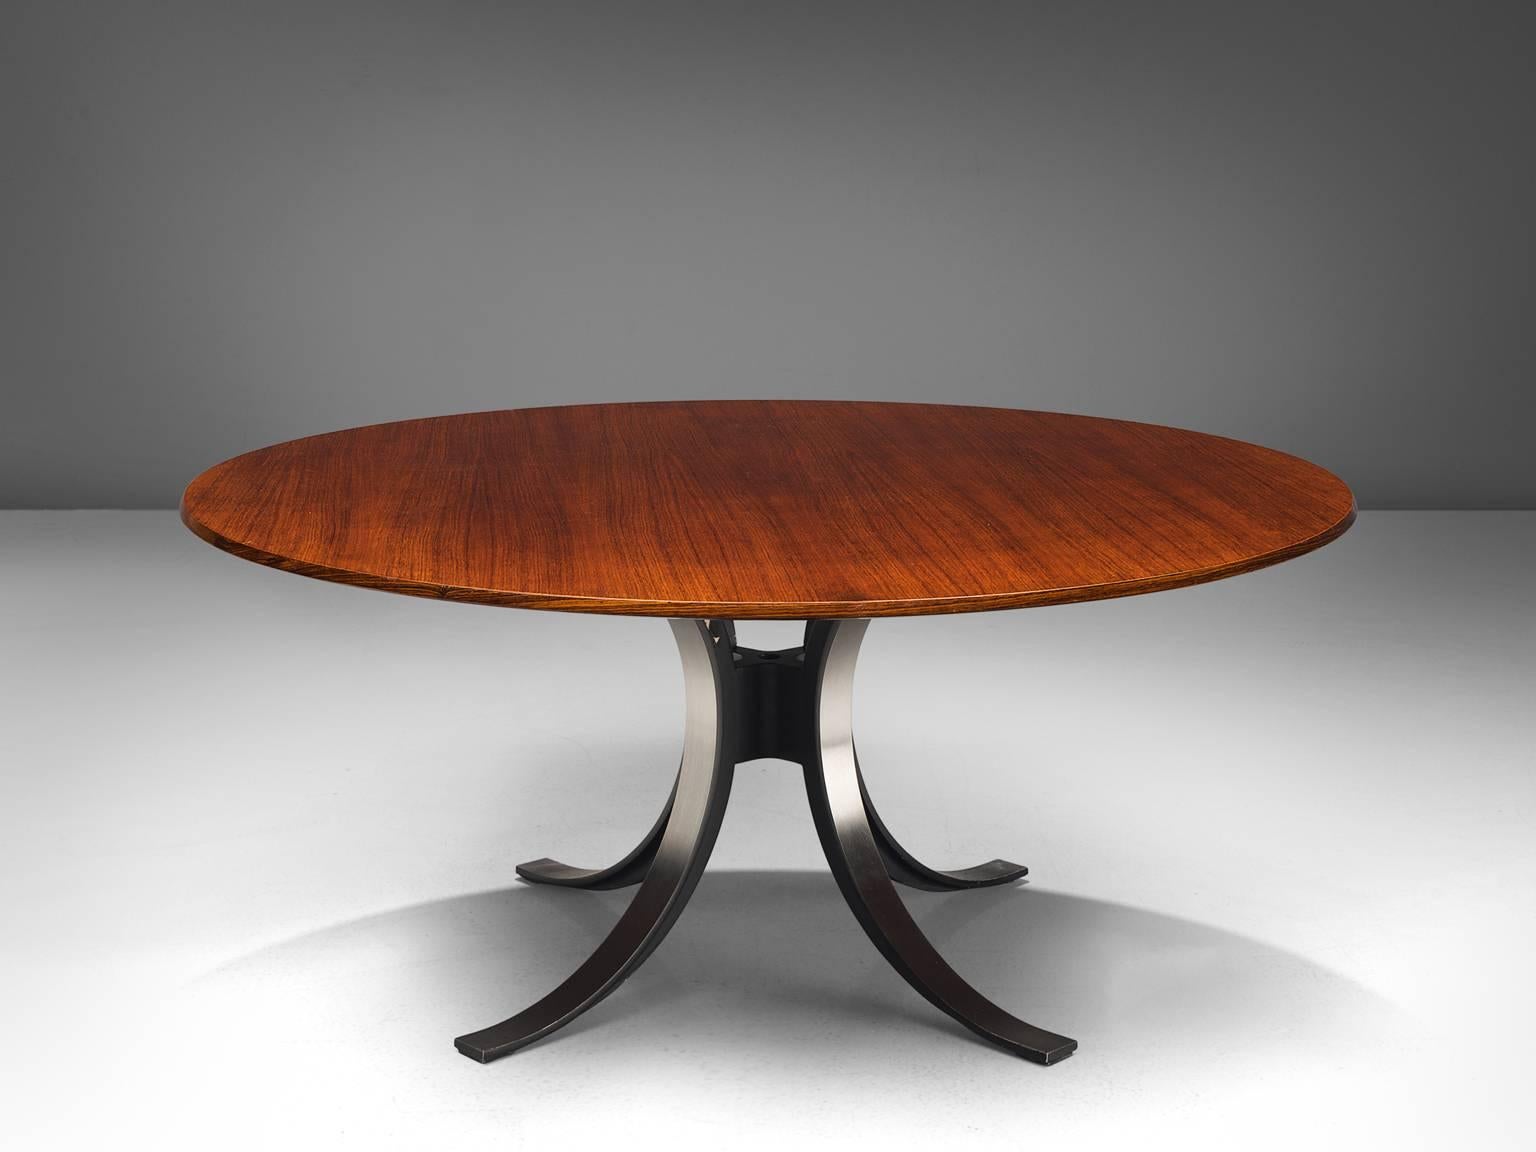 Osvaldo Borsani and Eugenio Gerli for Tecno, T-69 dining table, wood, steel, Italy, 1965.

Round dining table with wooden top and metal base. Characteristic for this table is the base. Consisting of four C-shaped legs. These semicircles together